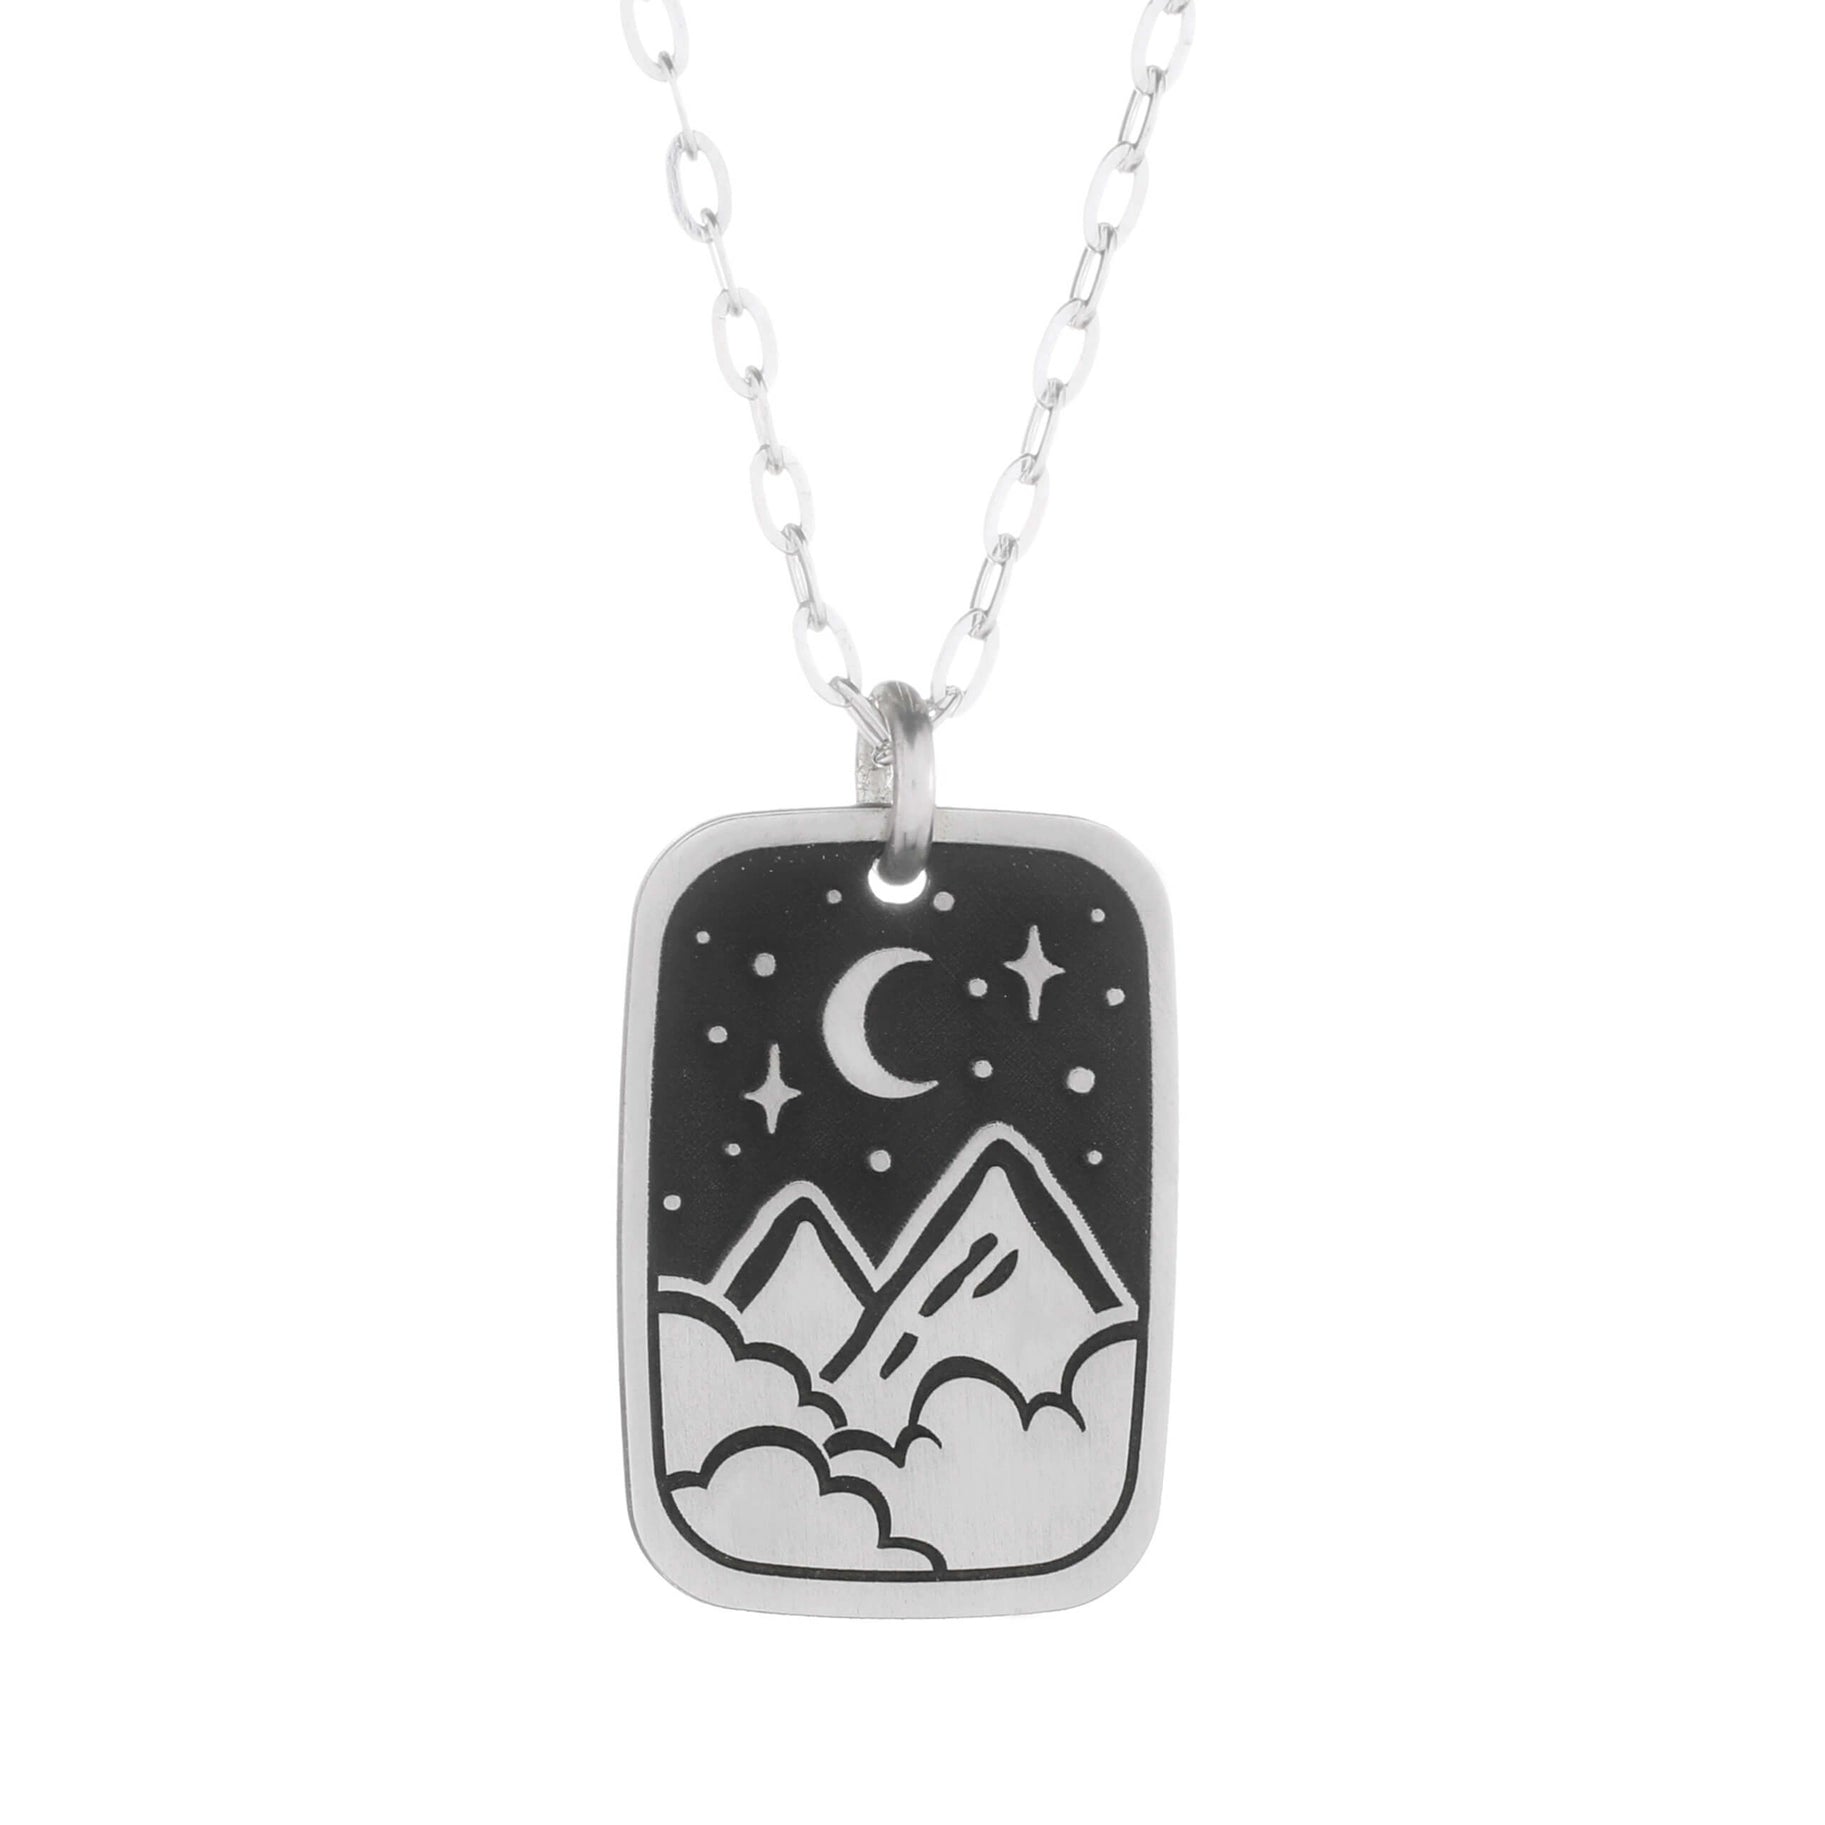 A Night in the Stars - Necklace